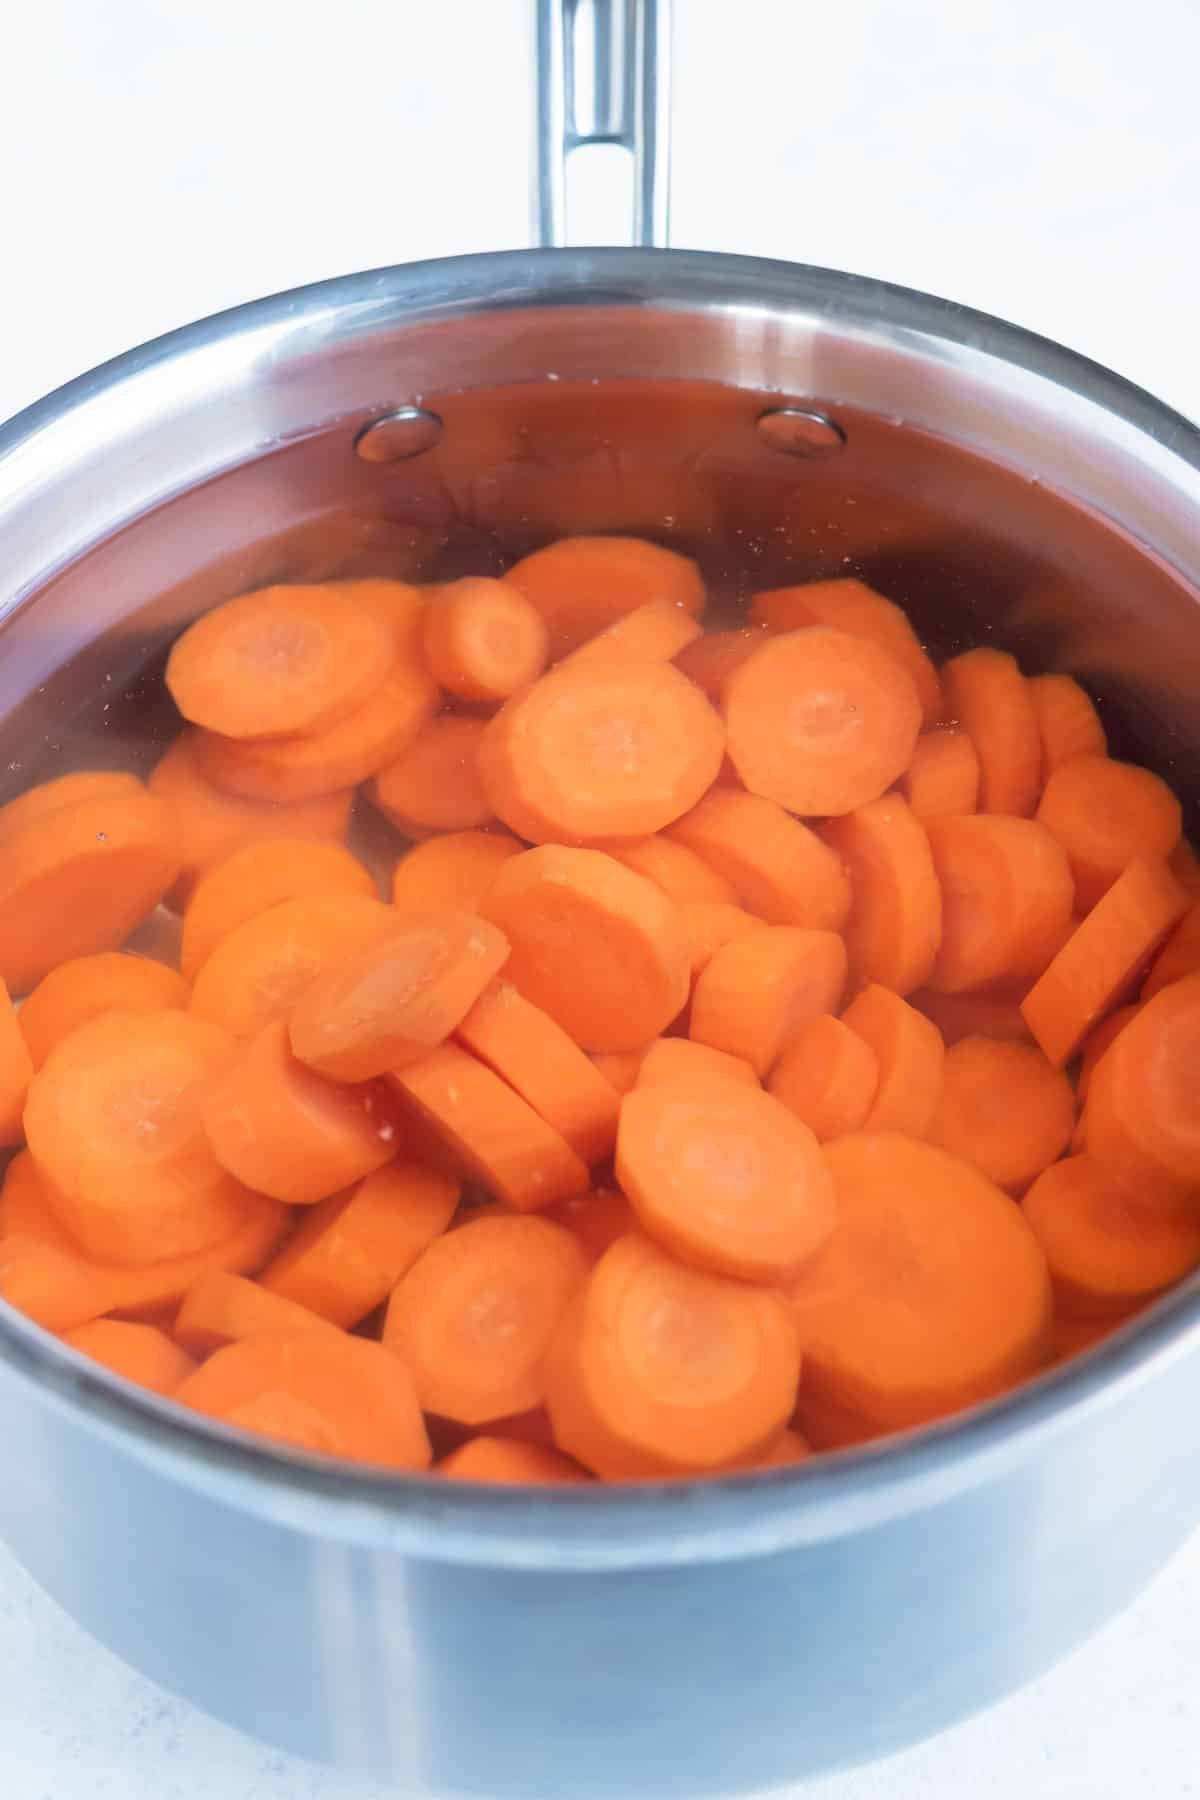 Sliced carrots are complete submerged in boil water in a pot.